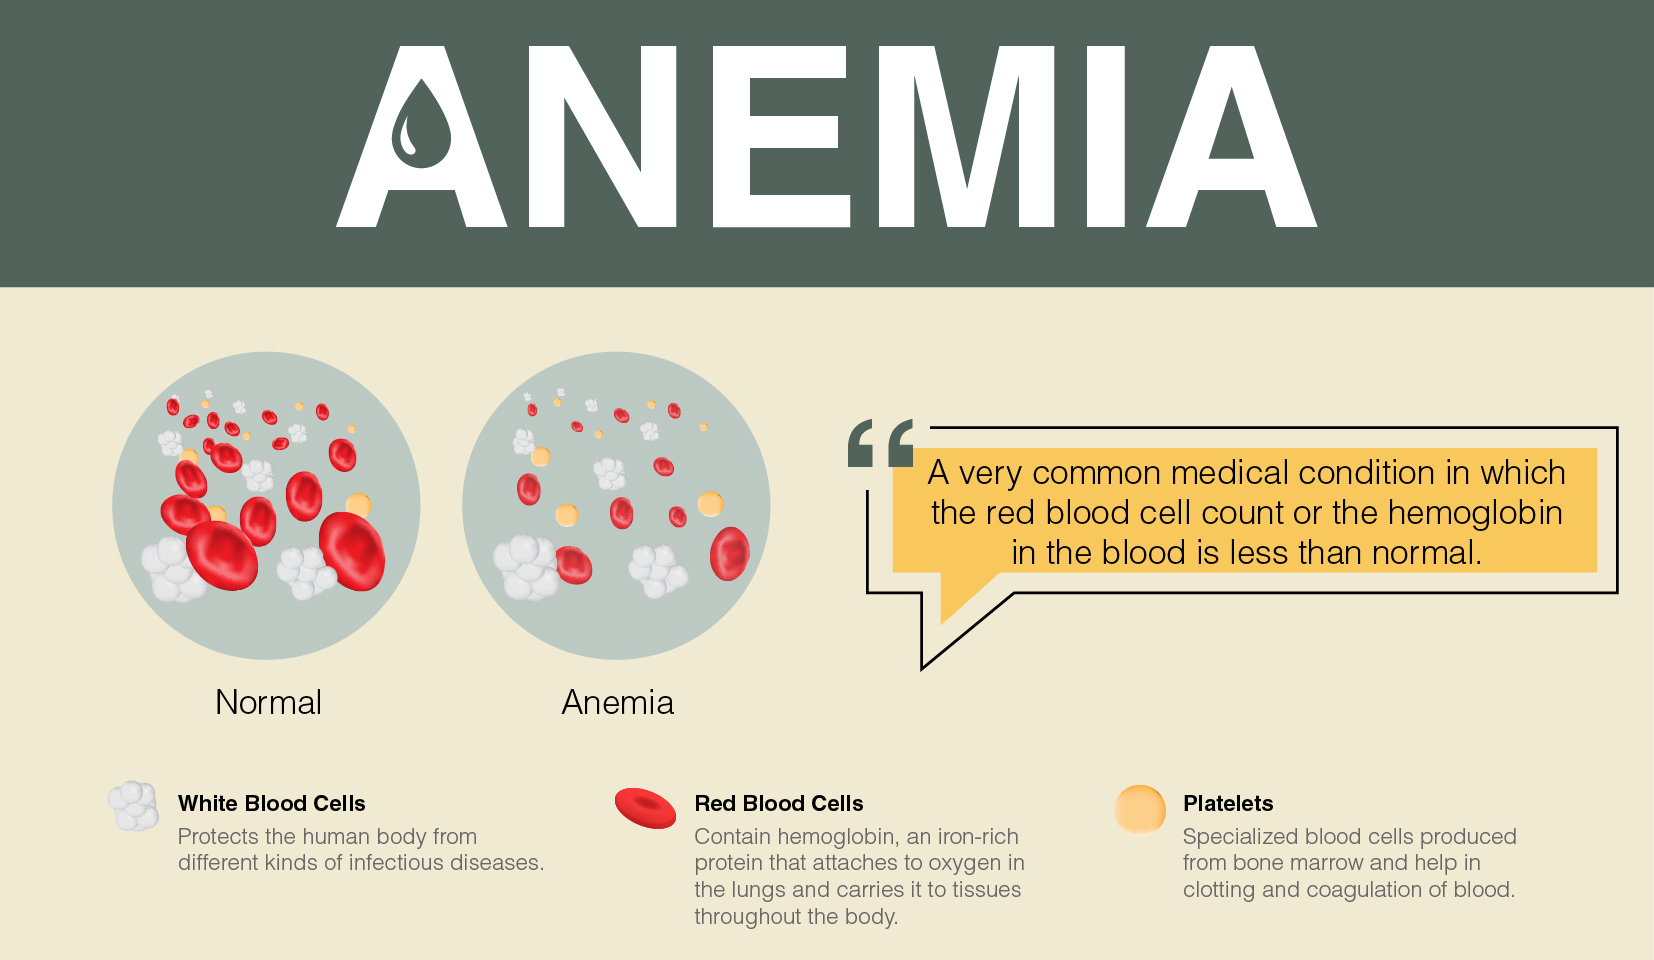 Overview of Anemia Signs, Symptoms, Causes and Treatment